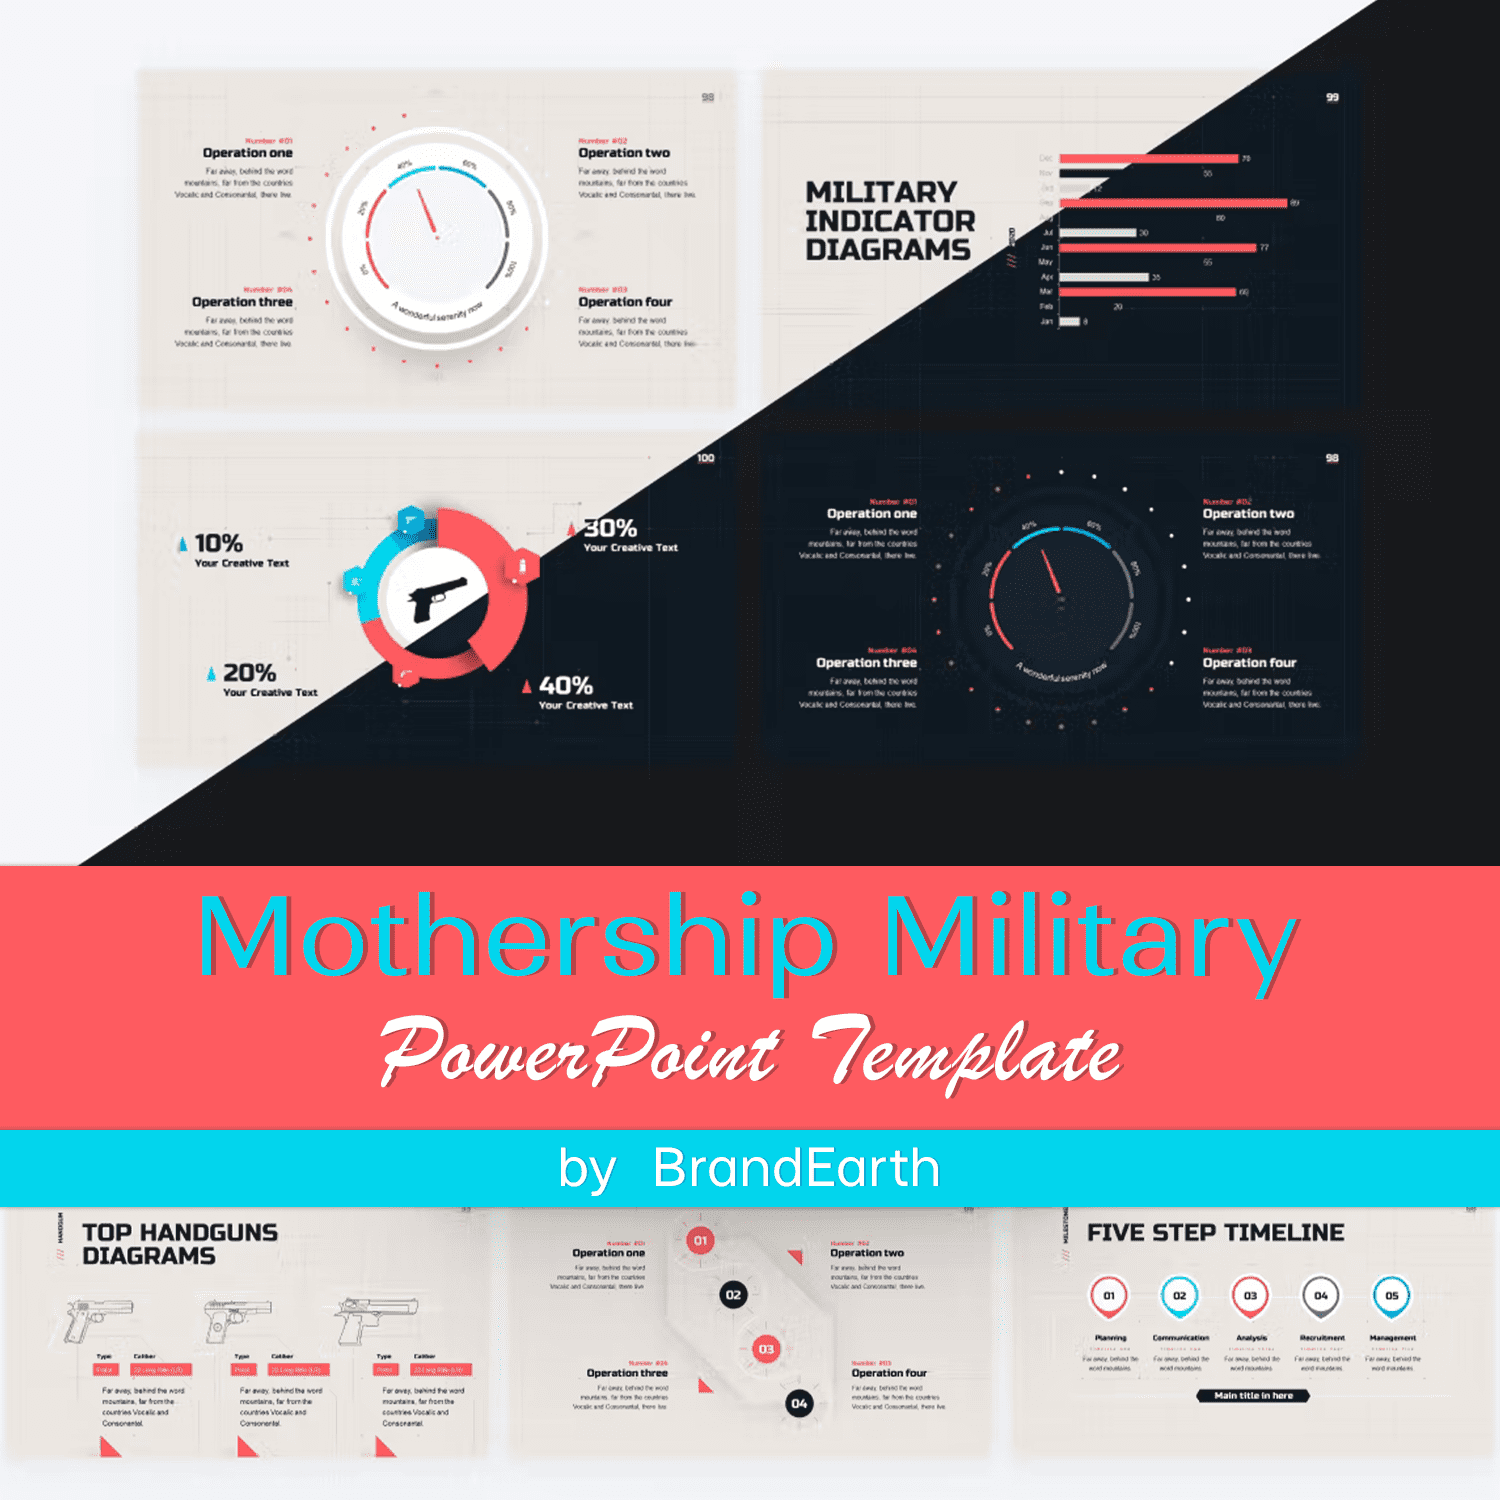 Mothership Military PowerPoint Template Cover.